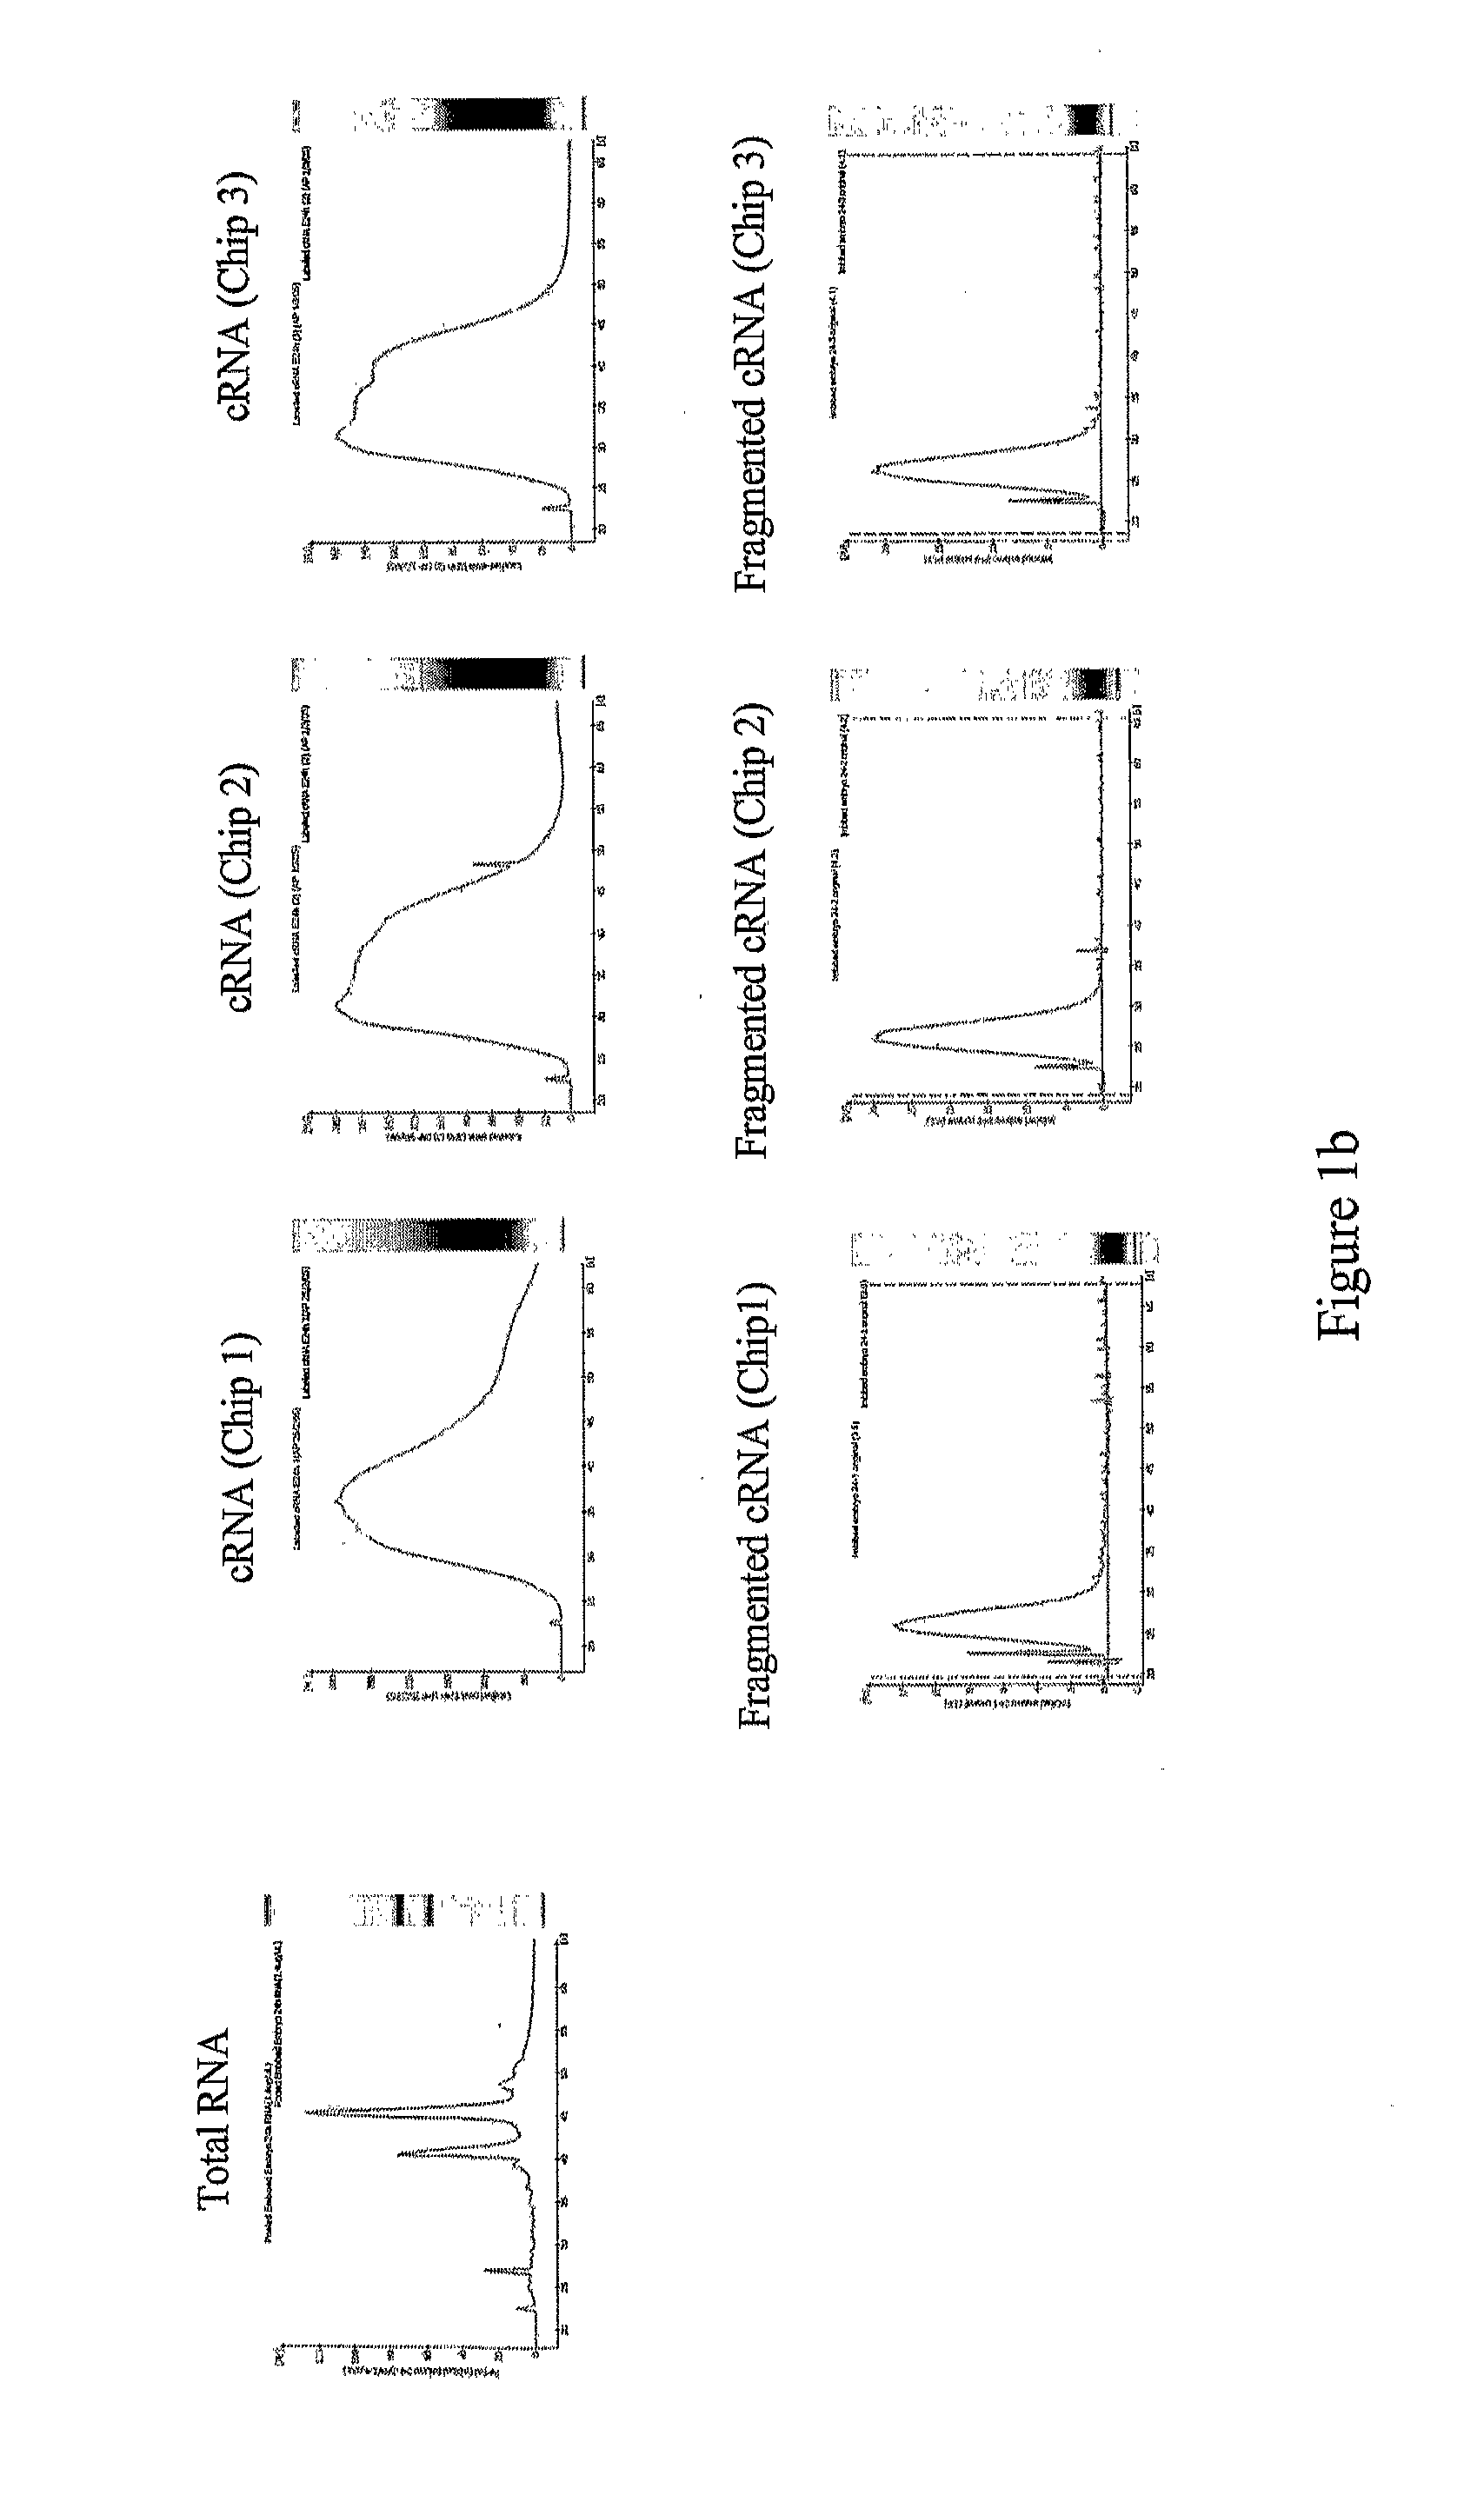 Plant Promoter Operable in Endosperm and Uses Thereof